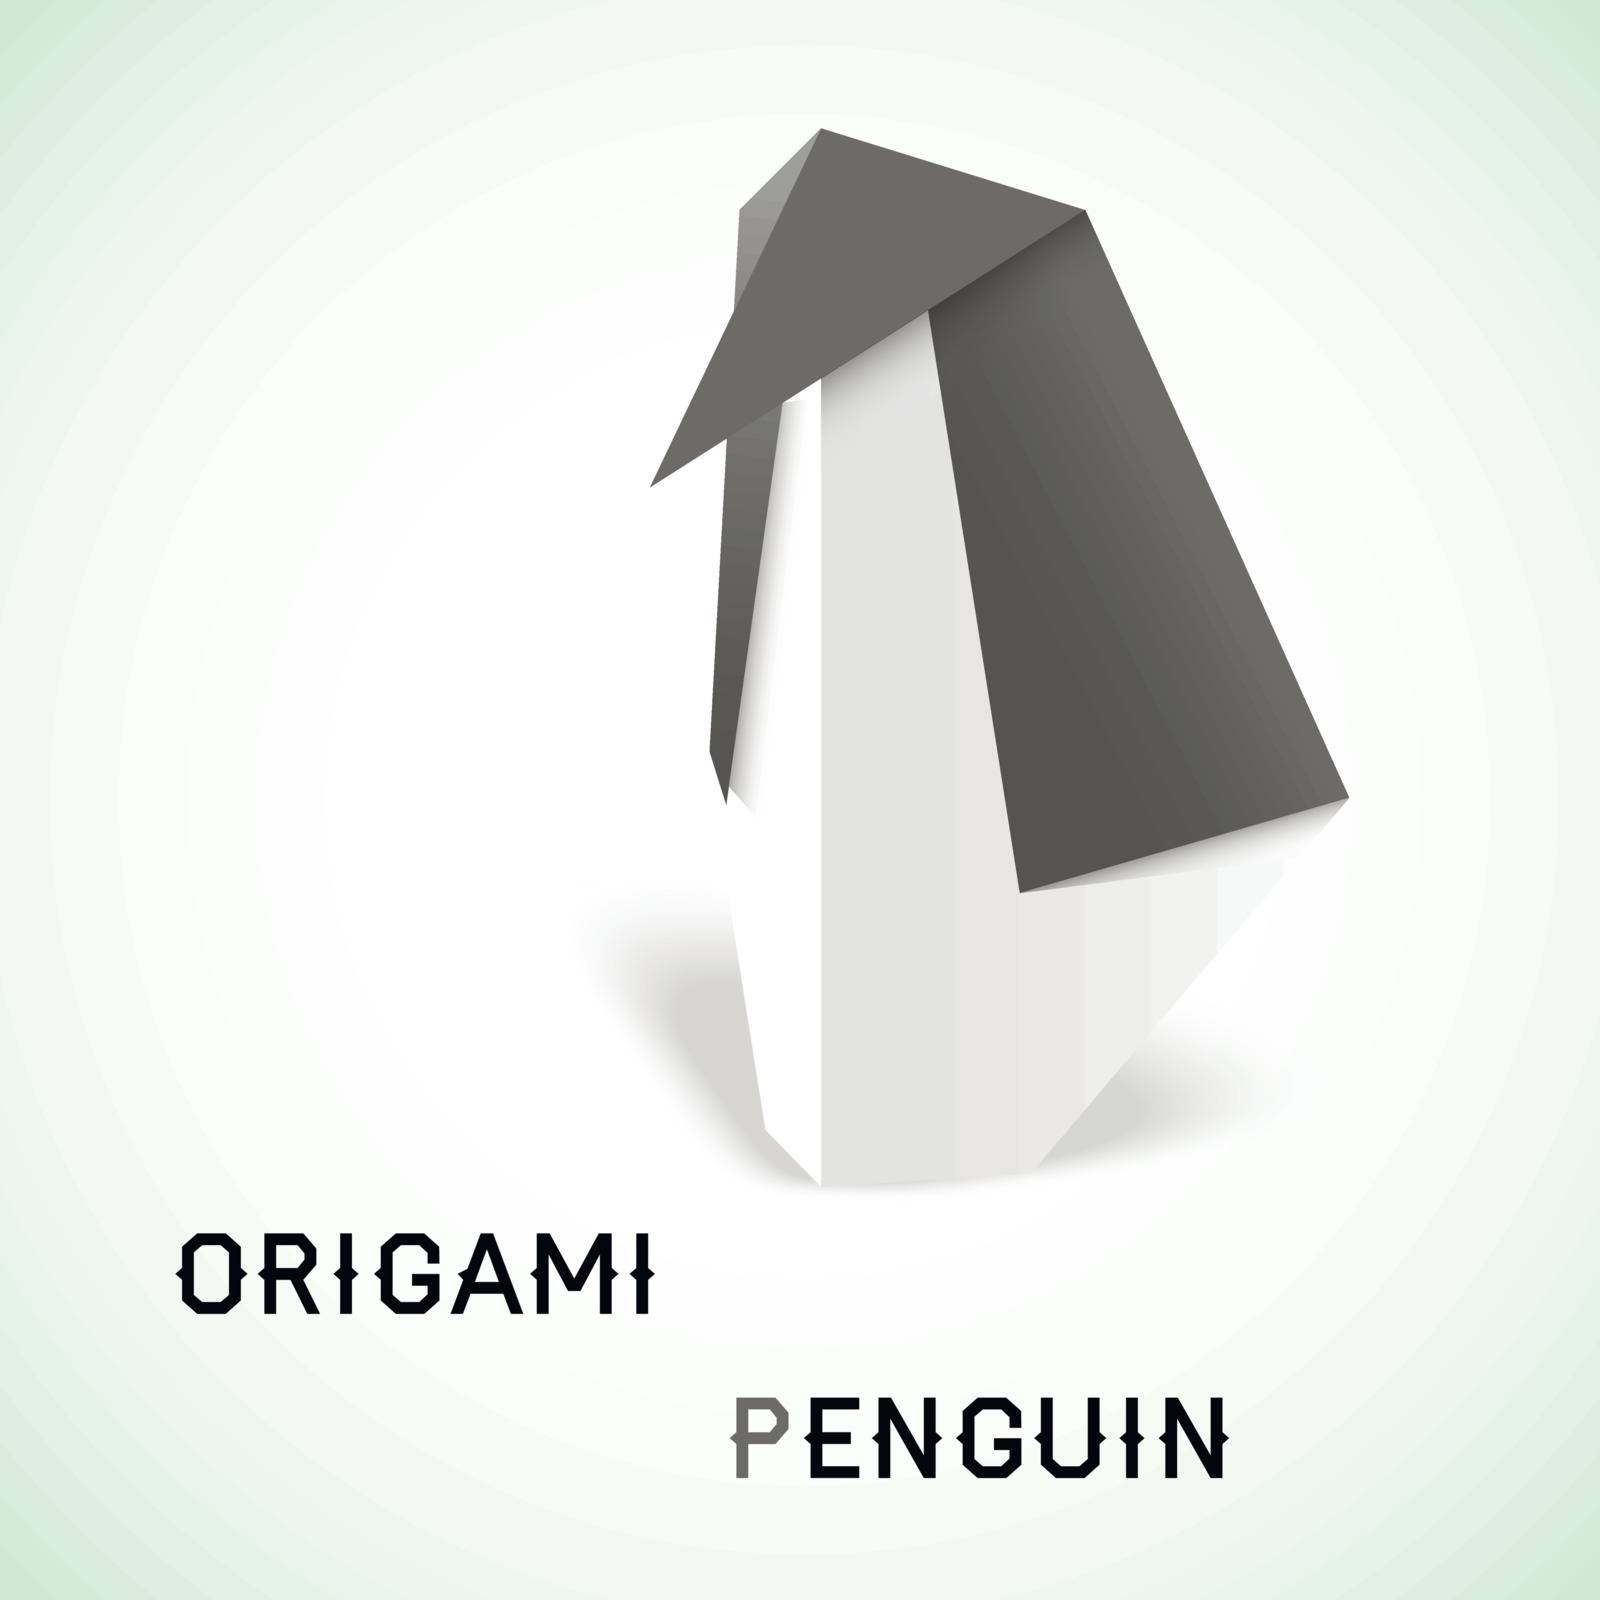 Penguin origami by Coline